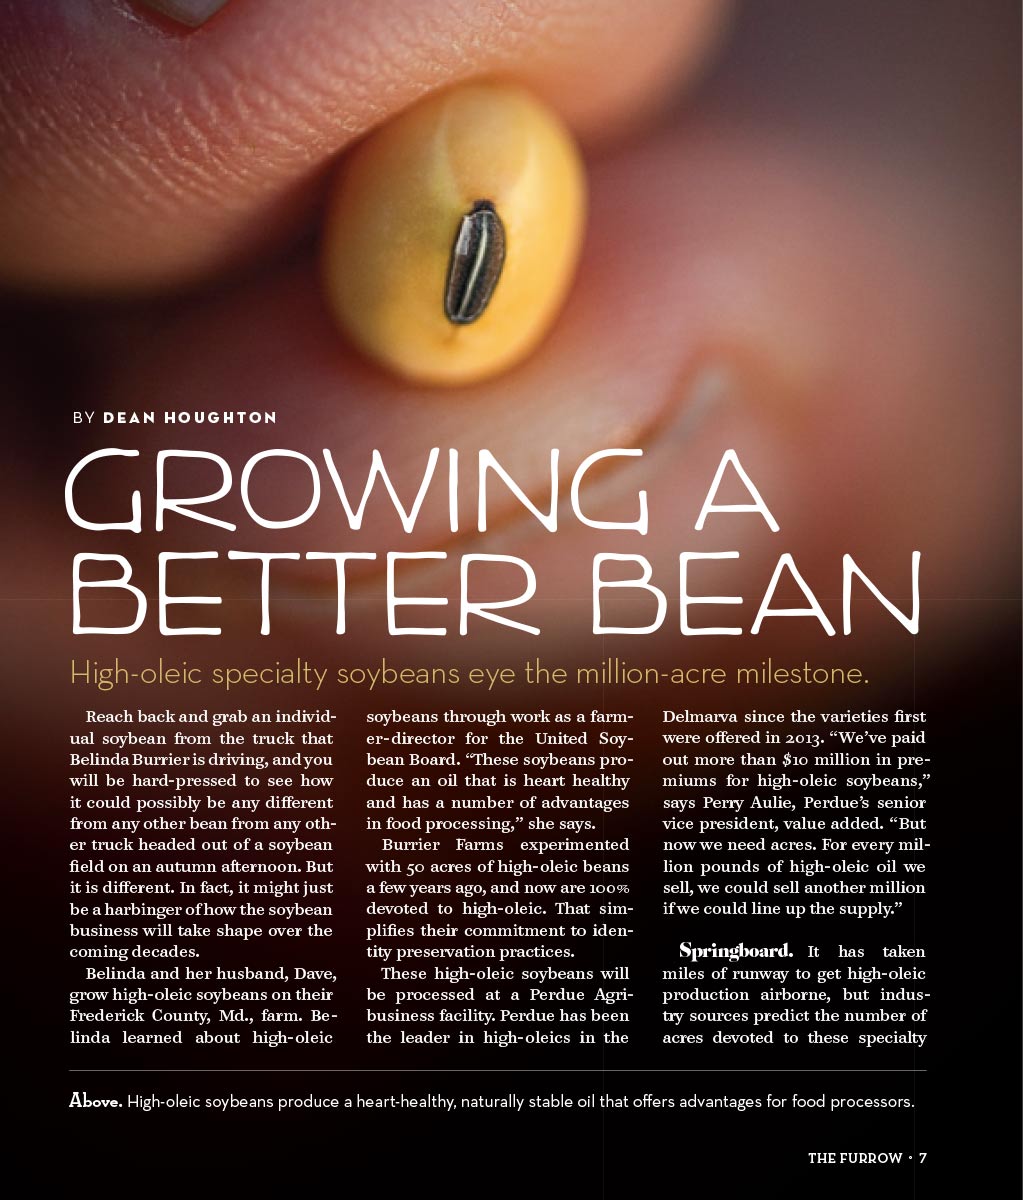 an excerpt from the "Growing a Better Bean" article from The Furrow